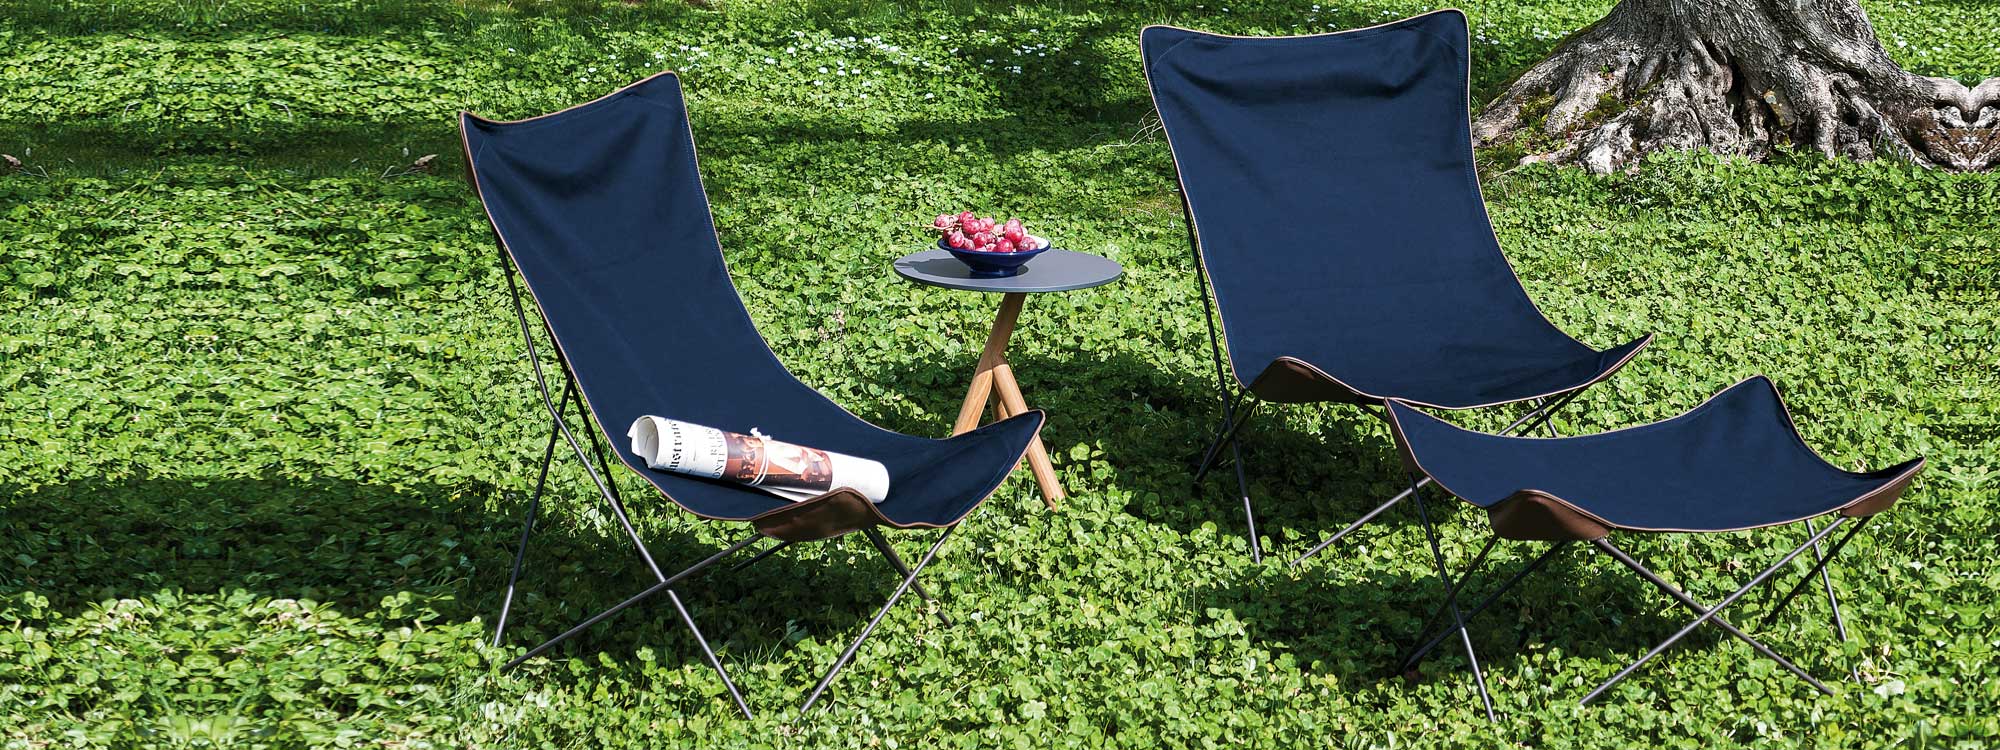 Lawrence outdoor butterfly chair is a modern garden lounge chair in high quality garden furniture materials by Roda Italian garden furniture